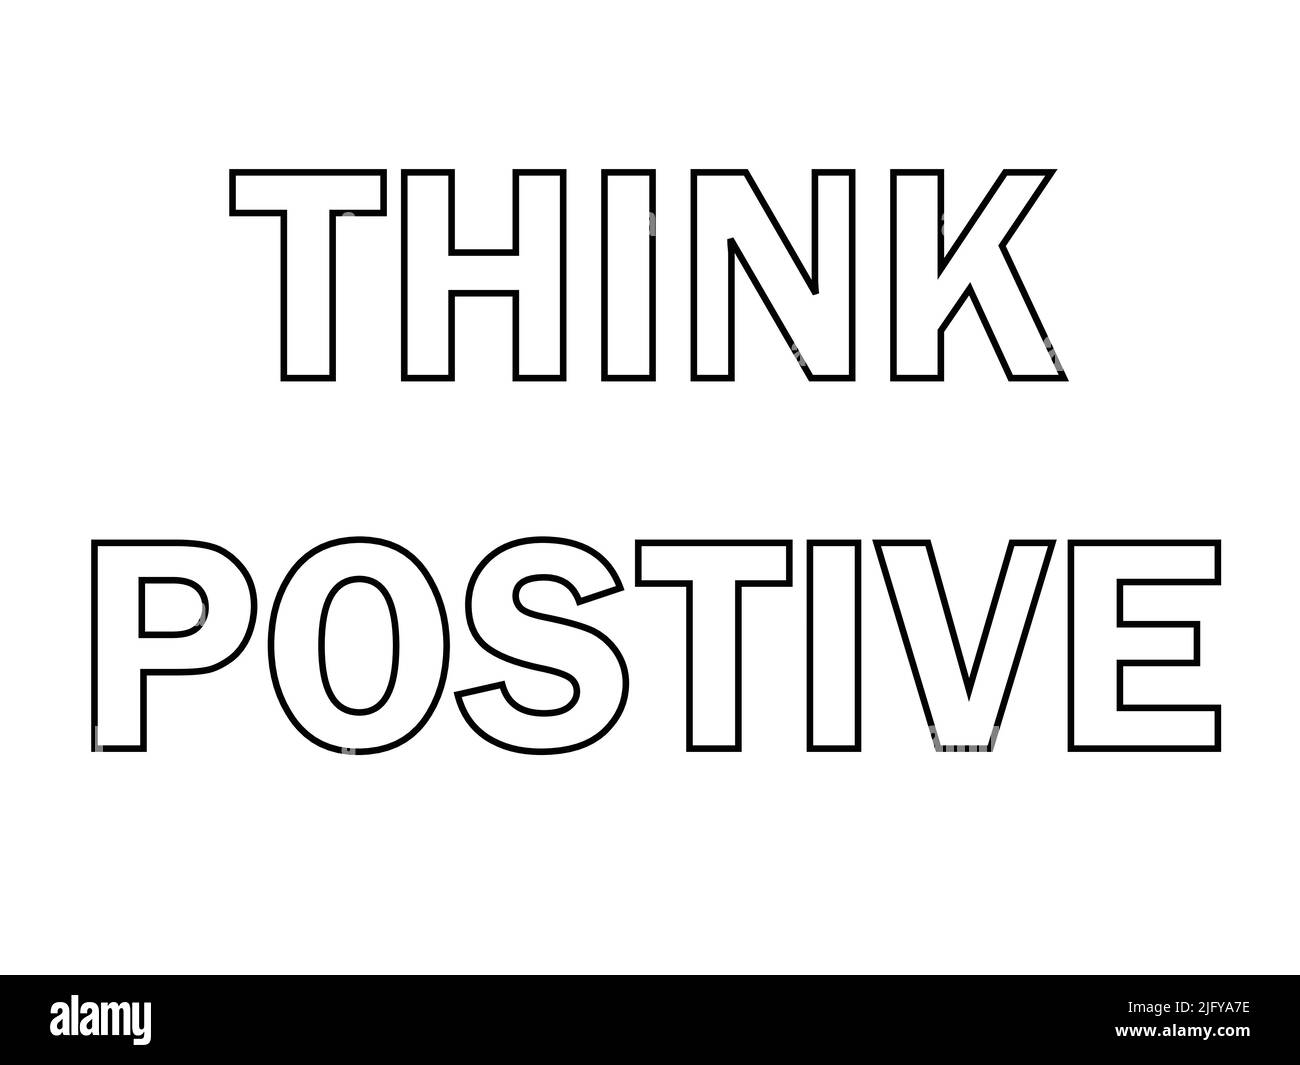 Think positive, motivational text inspirational quote. with white background Stock Vector